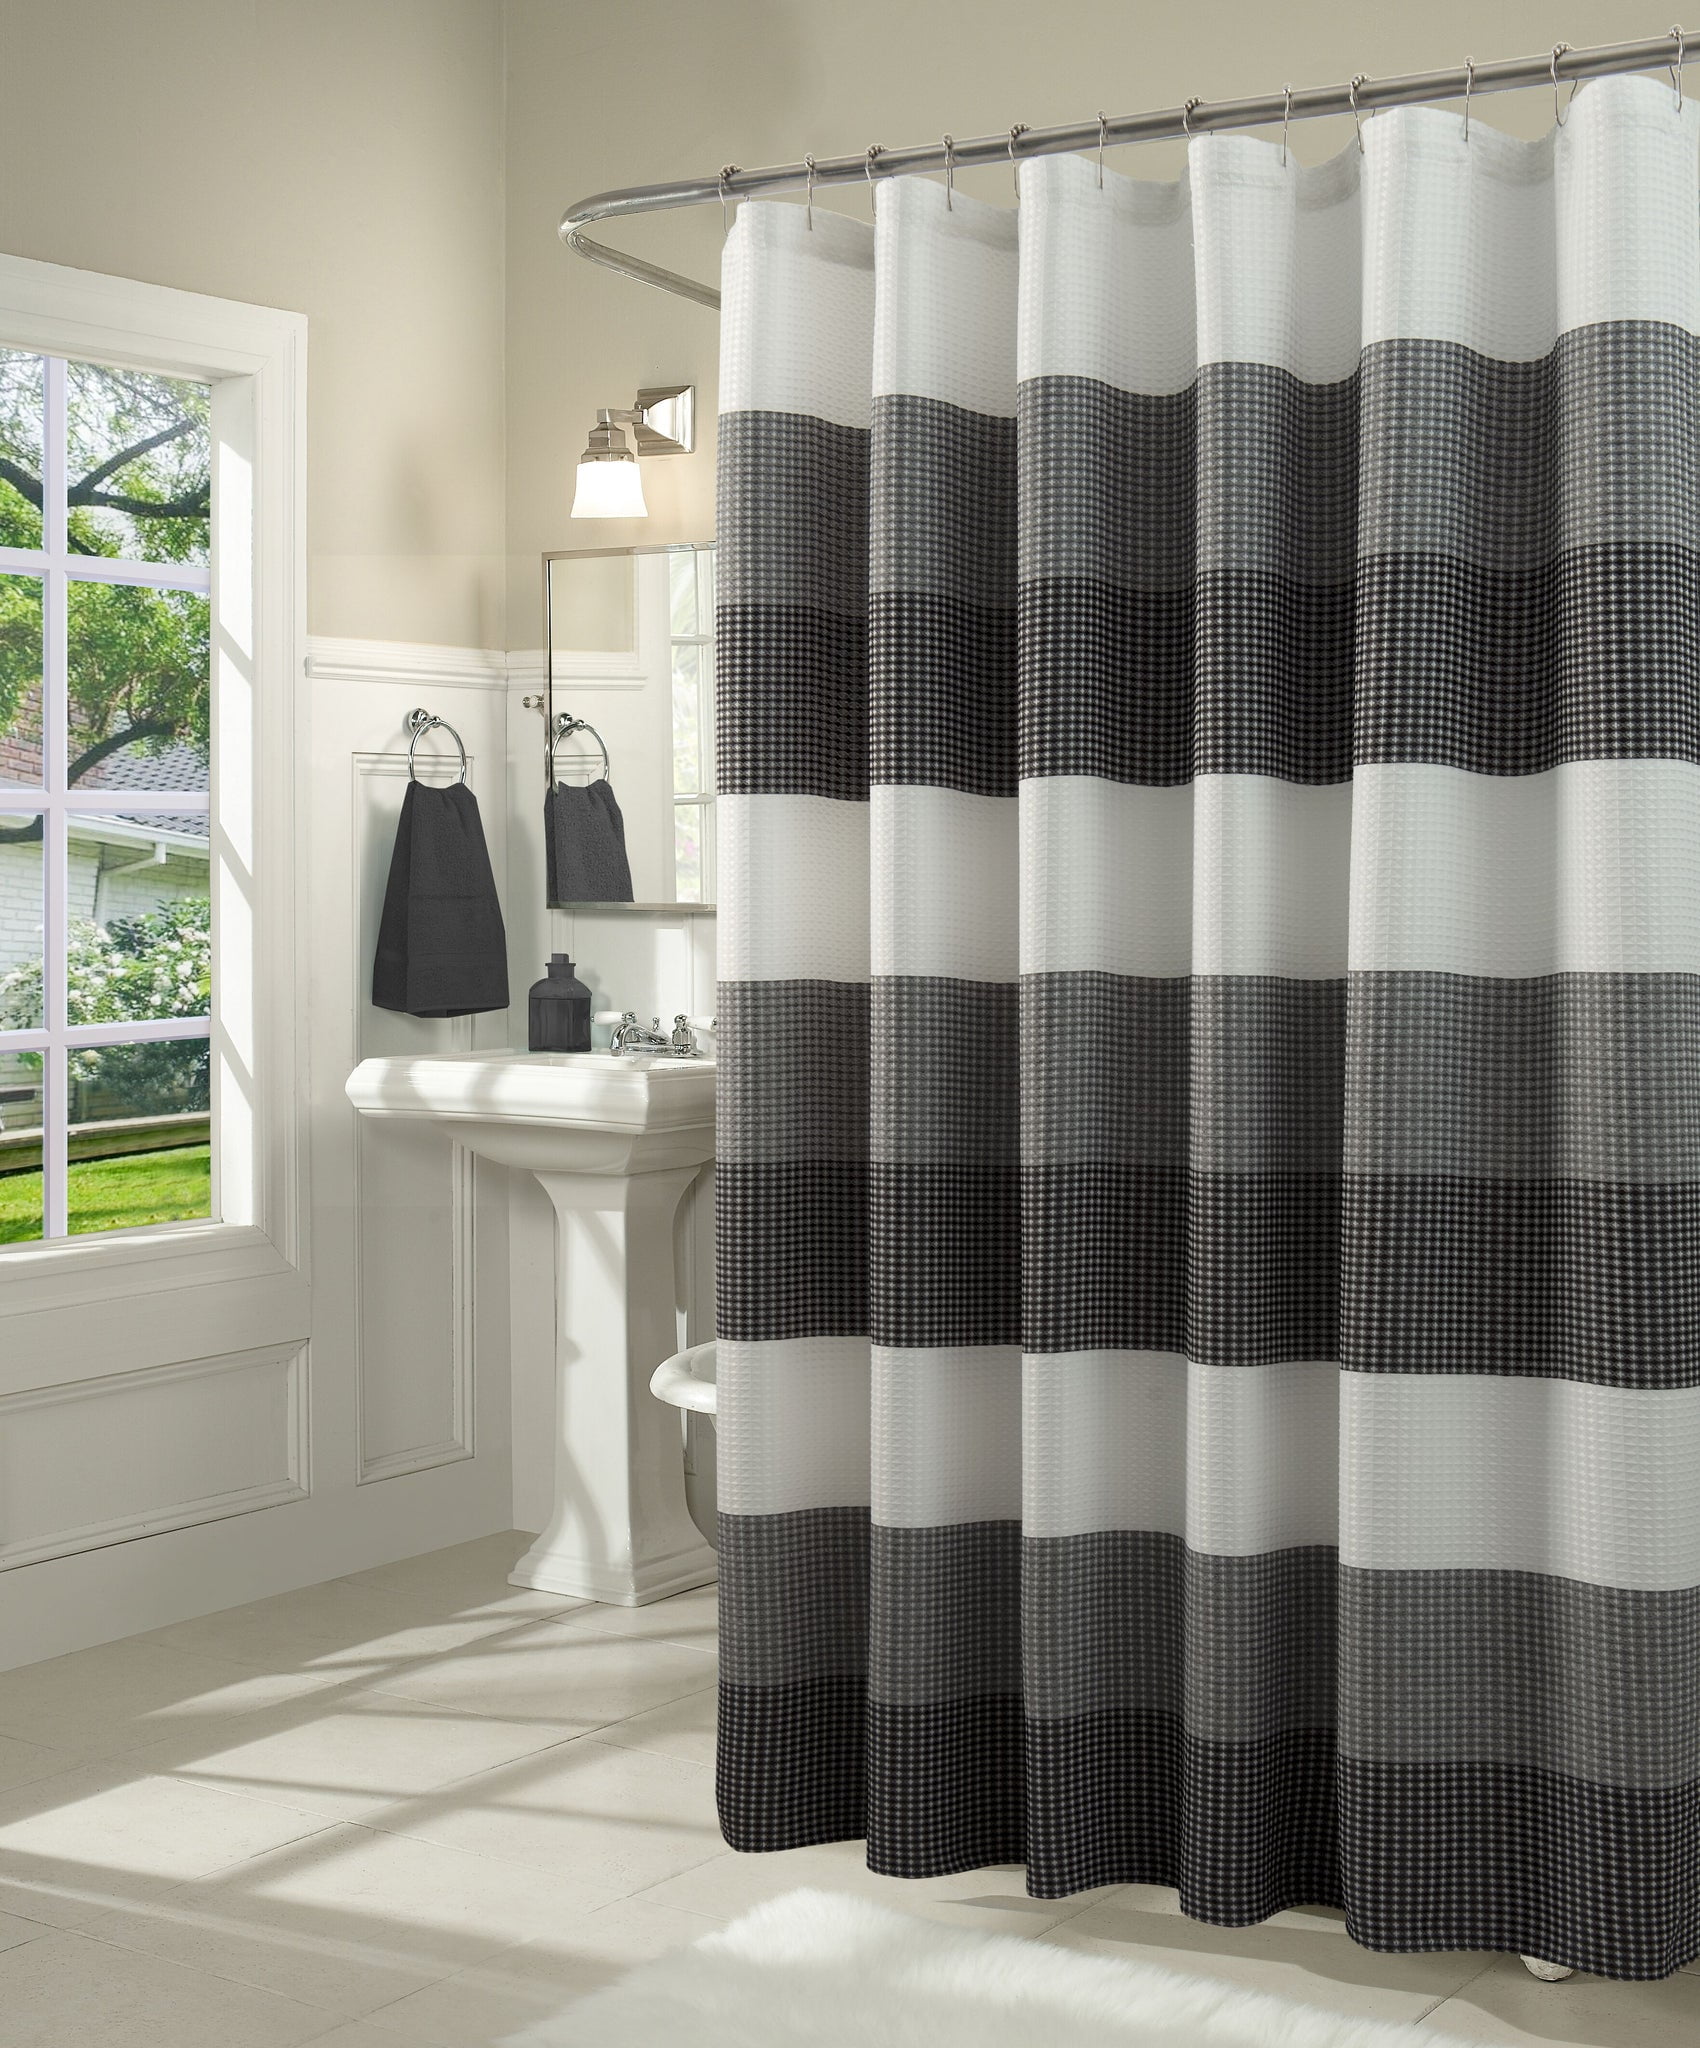 Shower Curtains 70 x 73 from DiaNoche Designs by Tina Lavoie